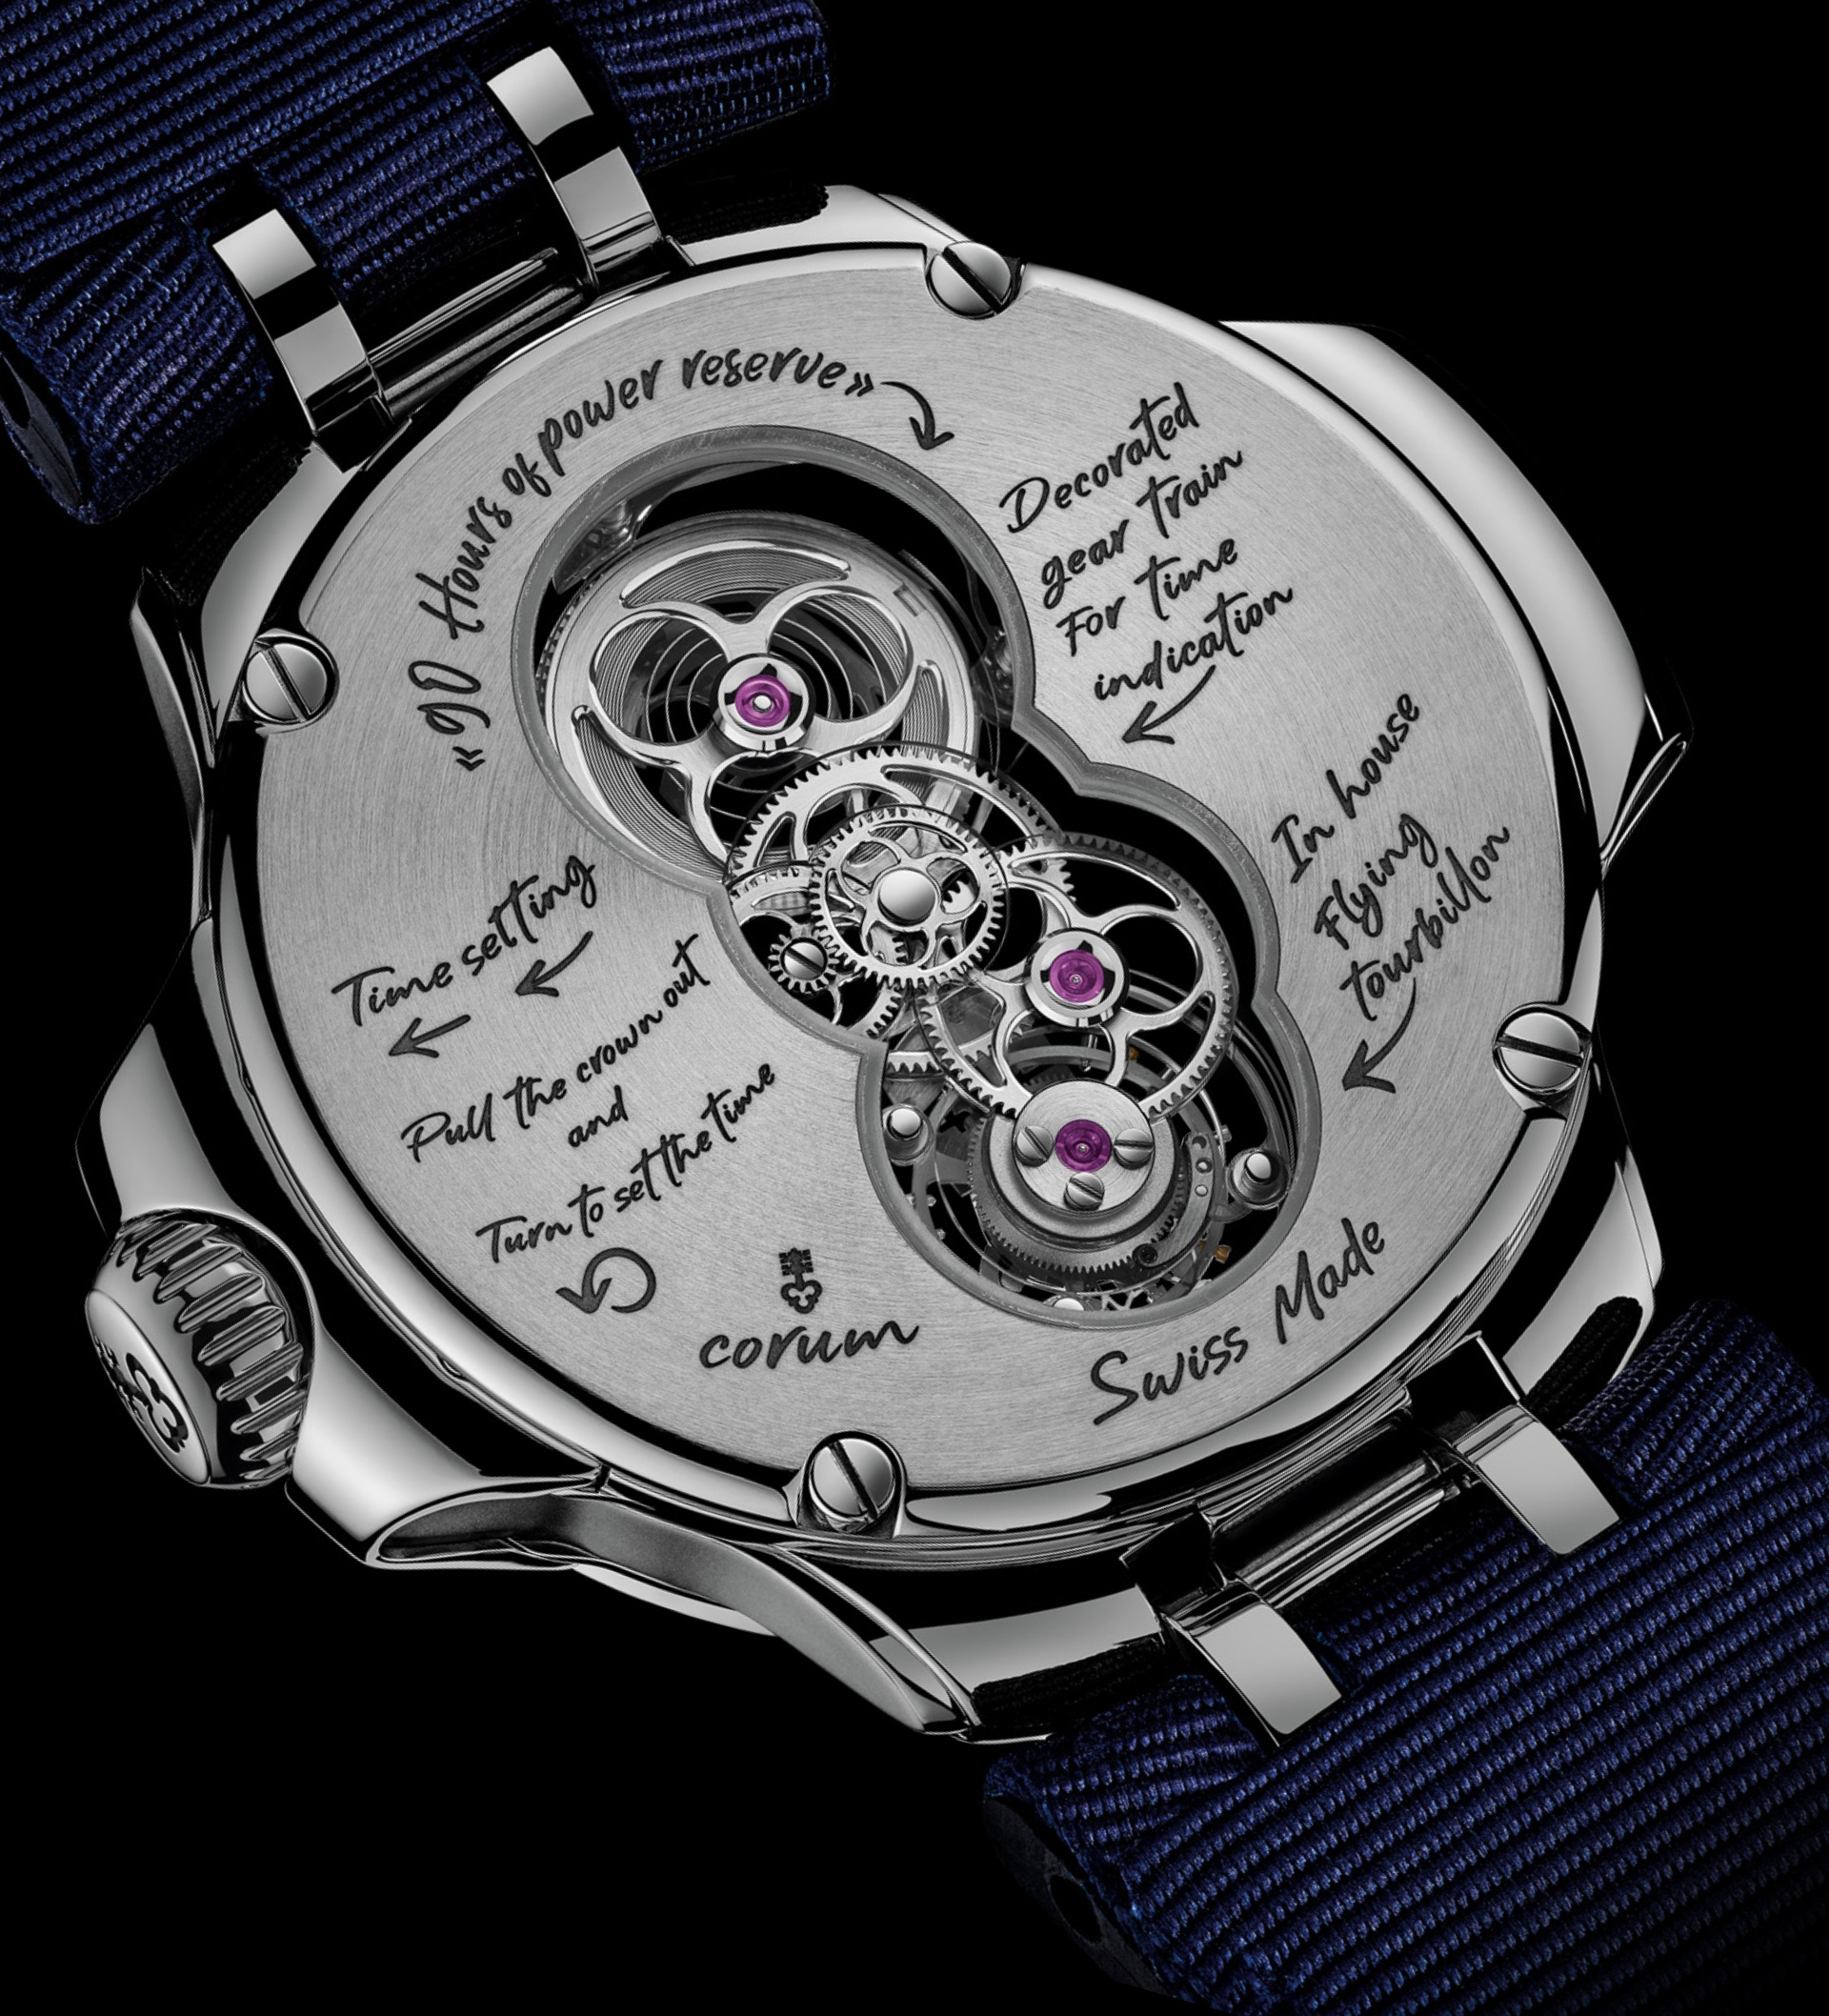 What is the power reserve of the Concept Watch?